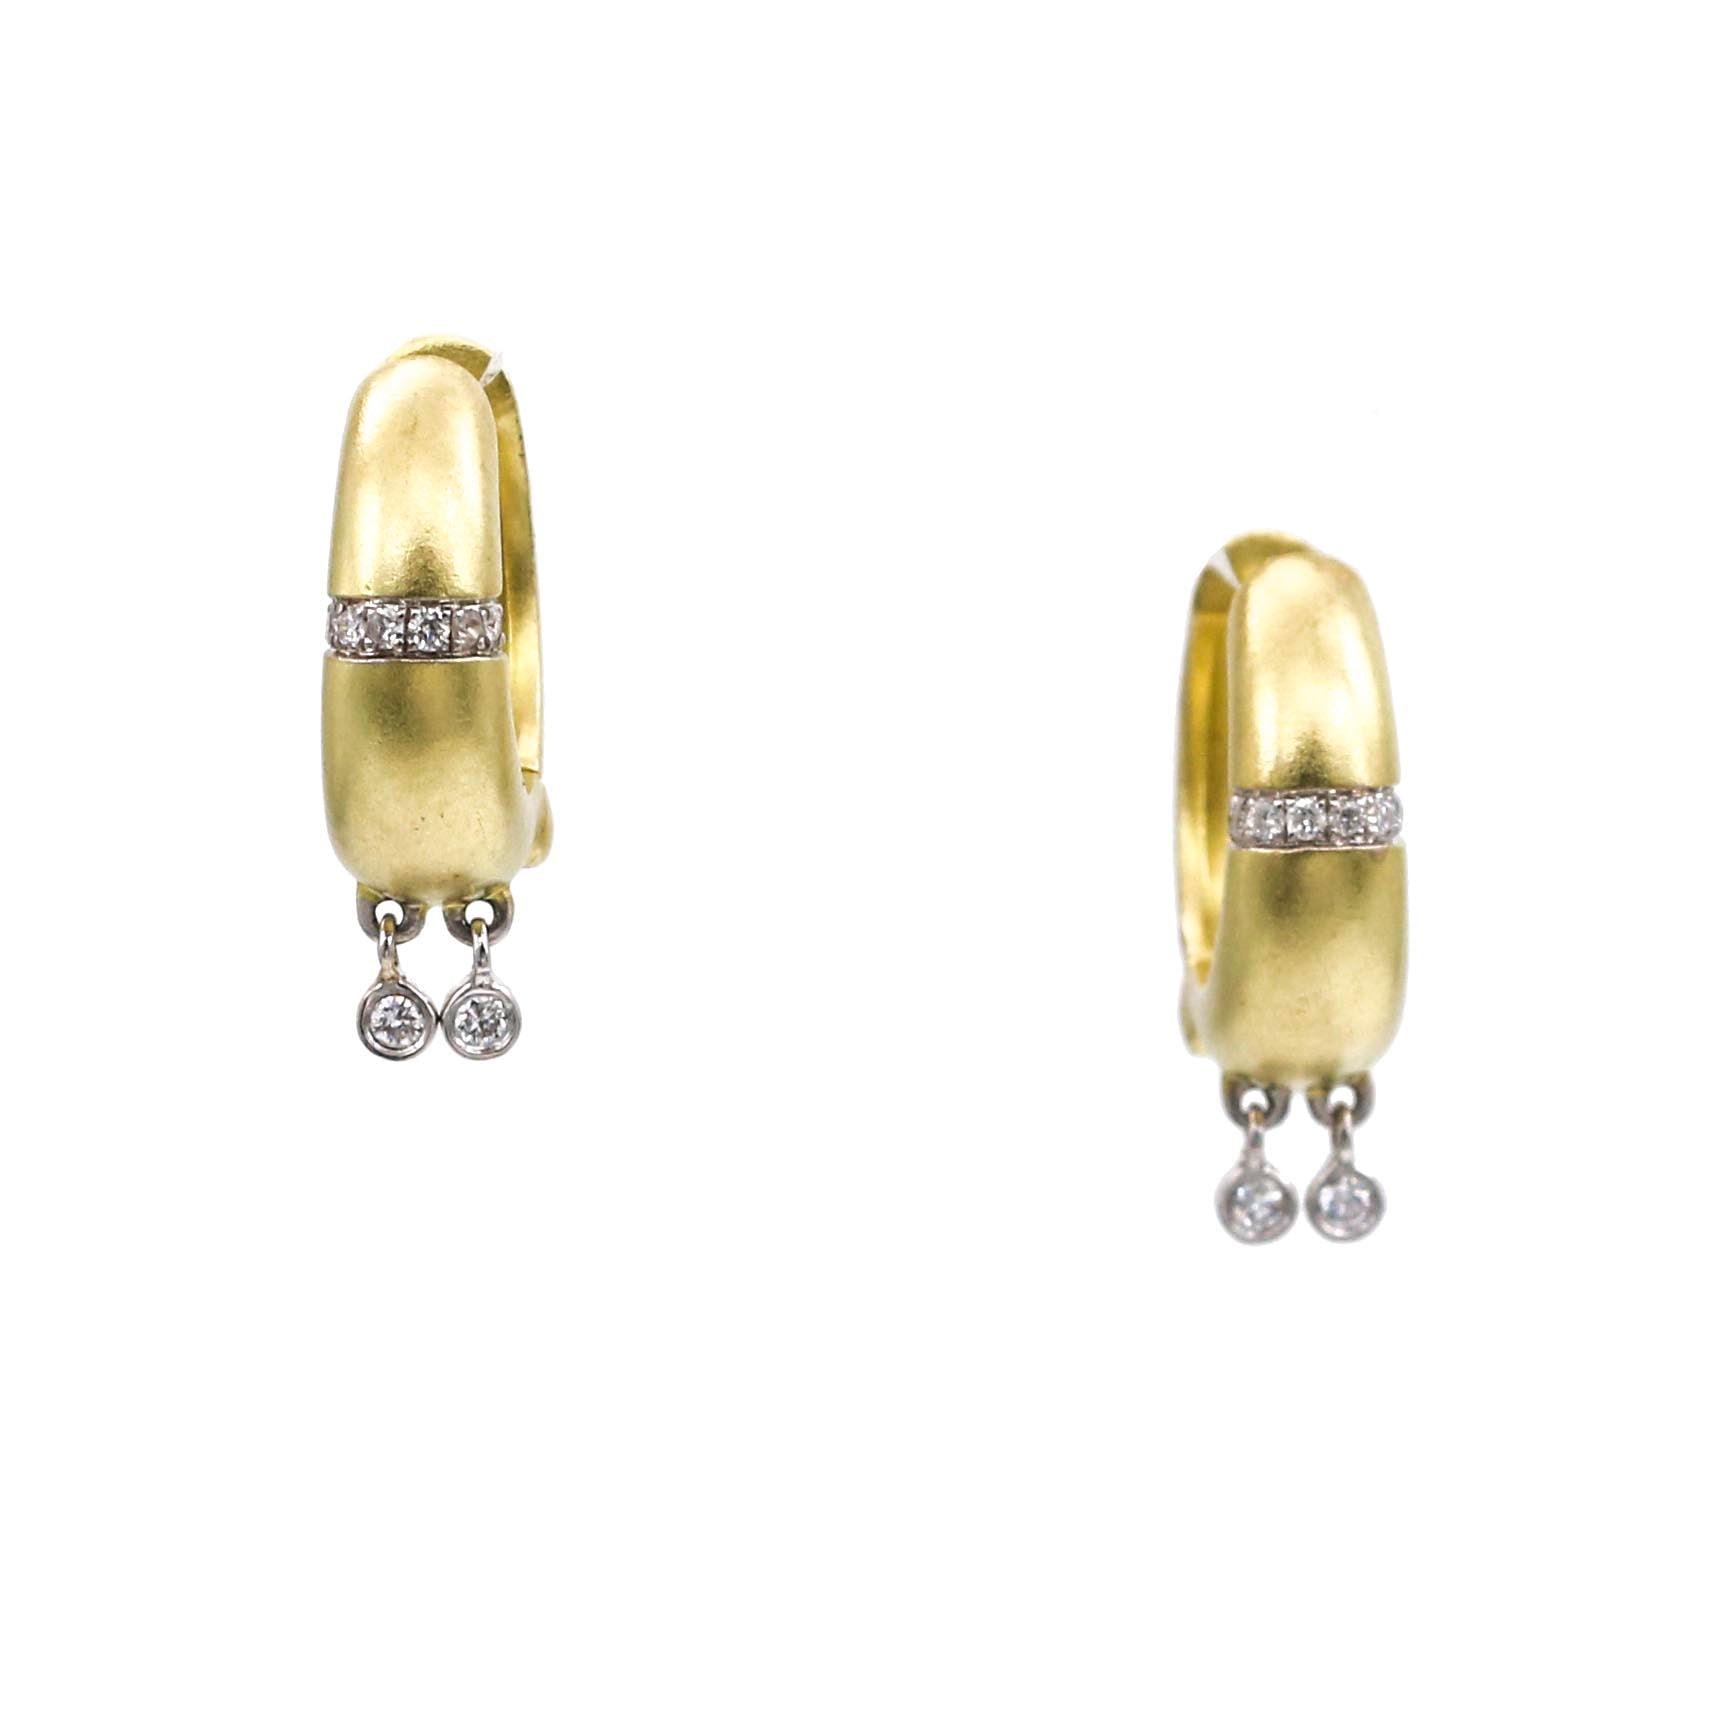 Meira T Small Hoop Earrings with Dangling Diamonds in 14k Yellow Gold - 31 Jewels Inc.